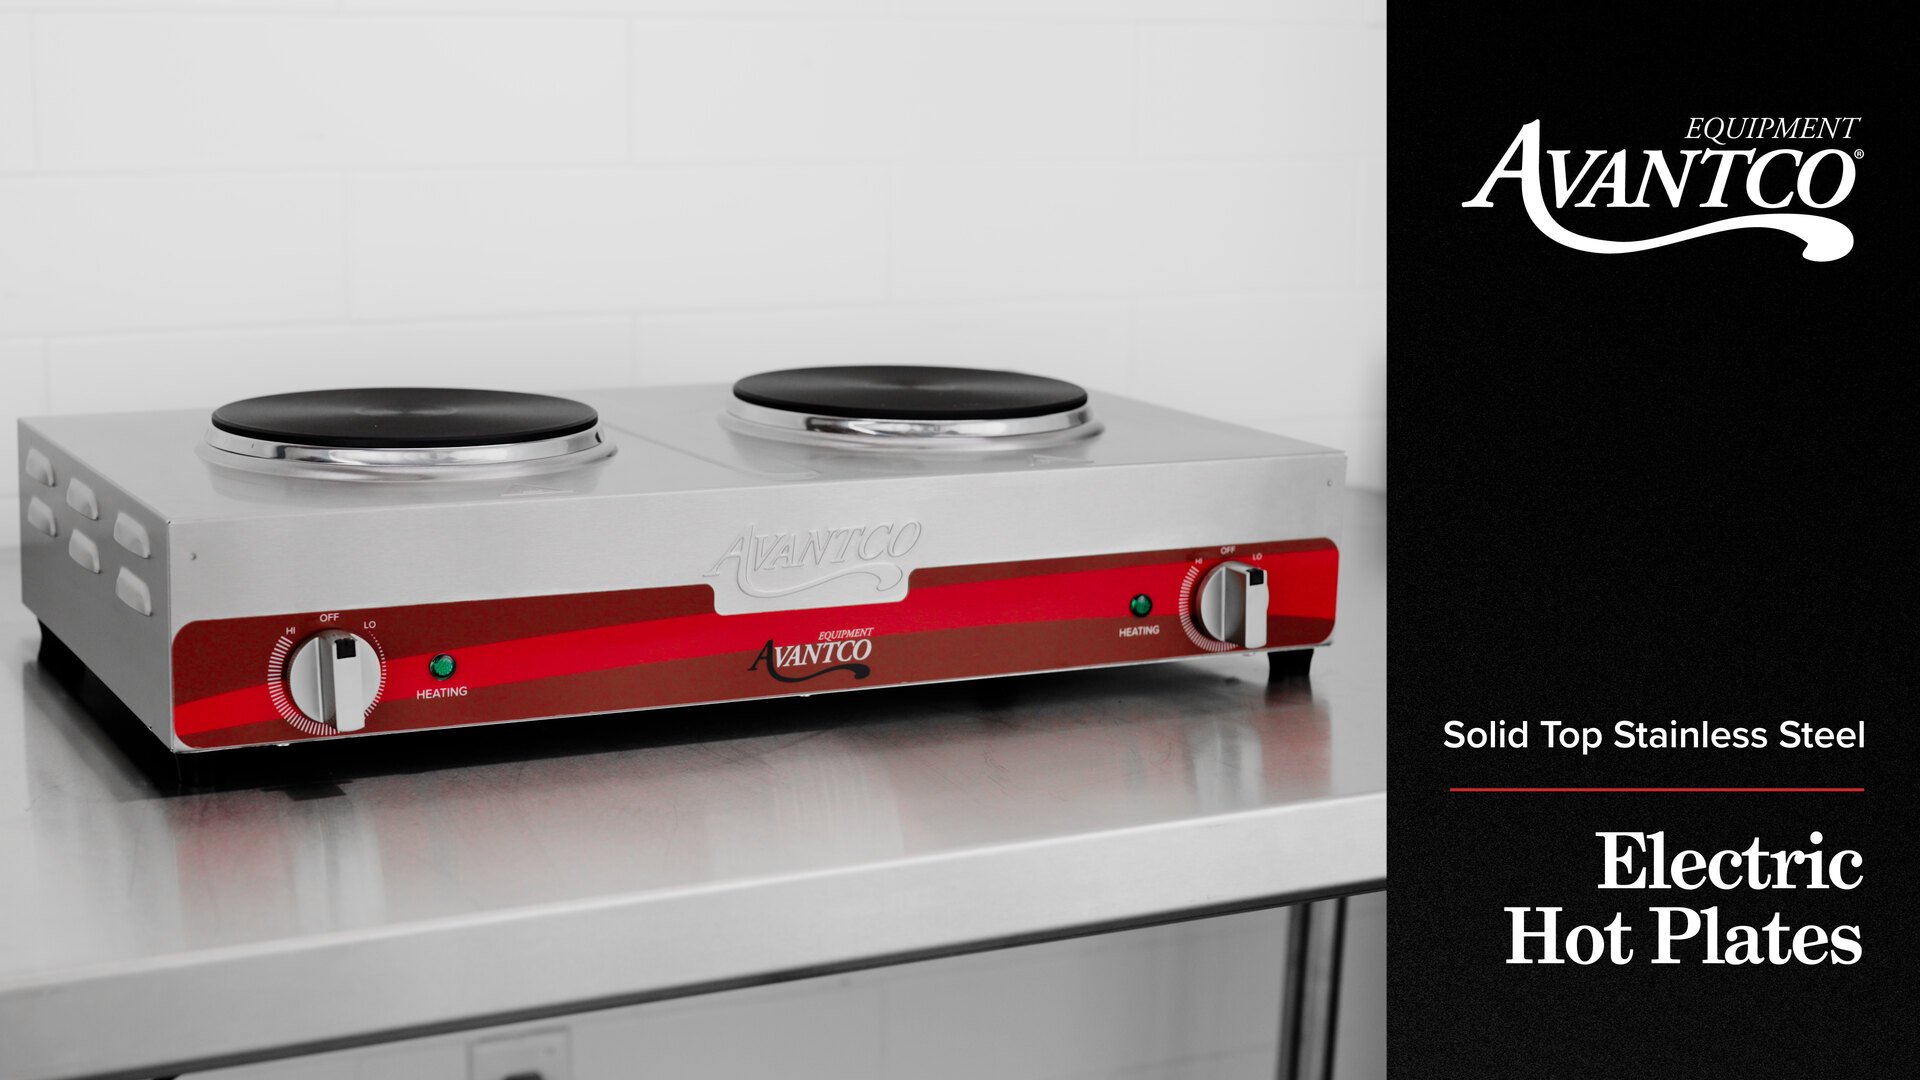 Avantco 177EB200A Single Burner Solid Top Stainless Steel Portable